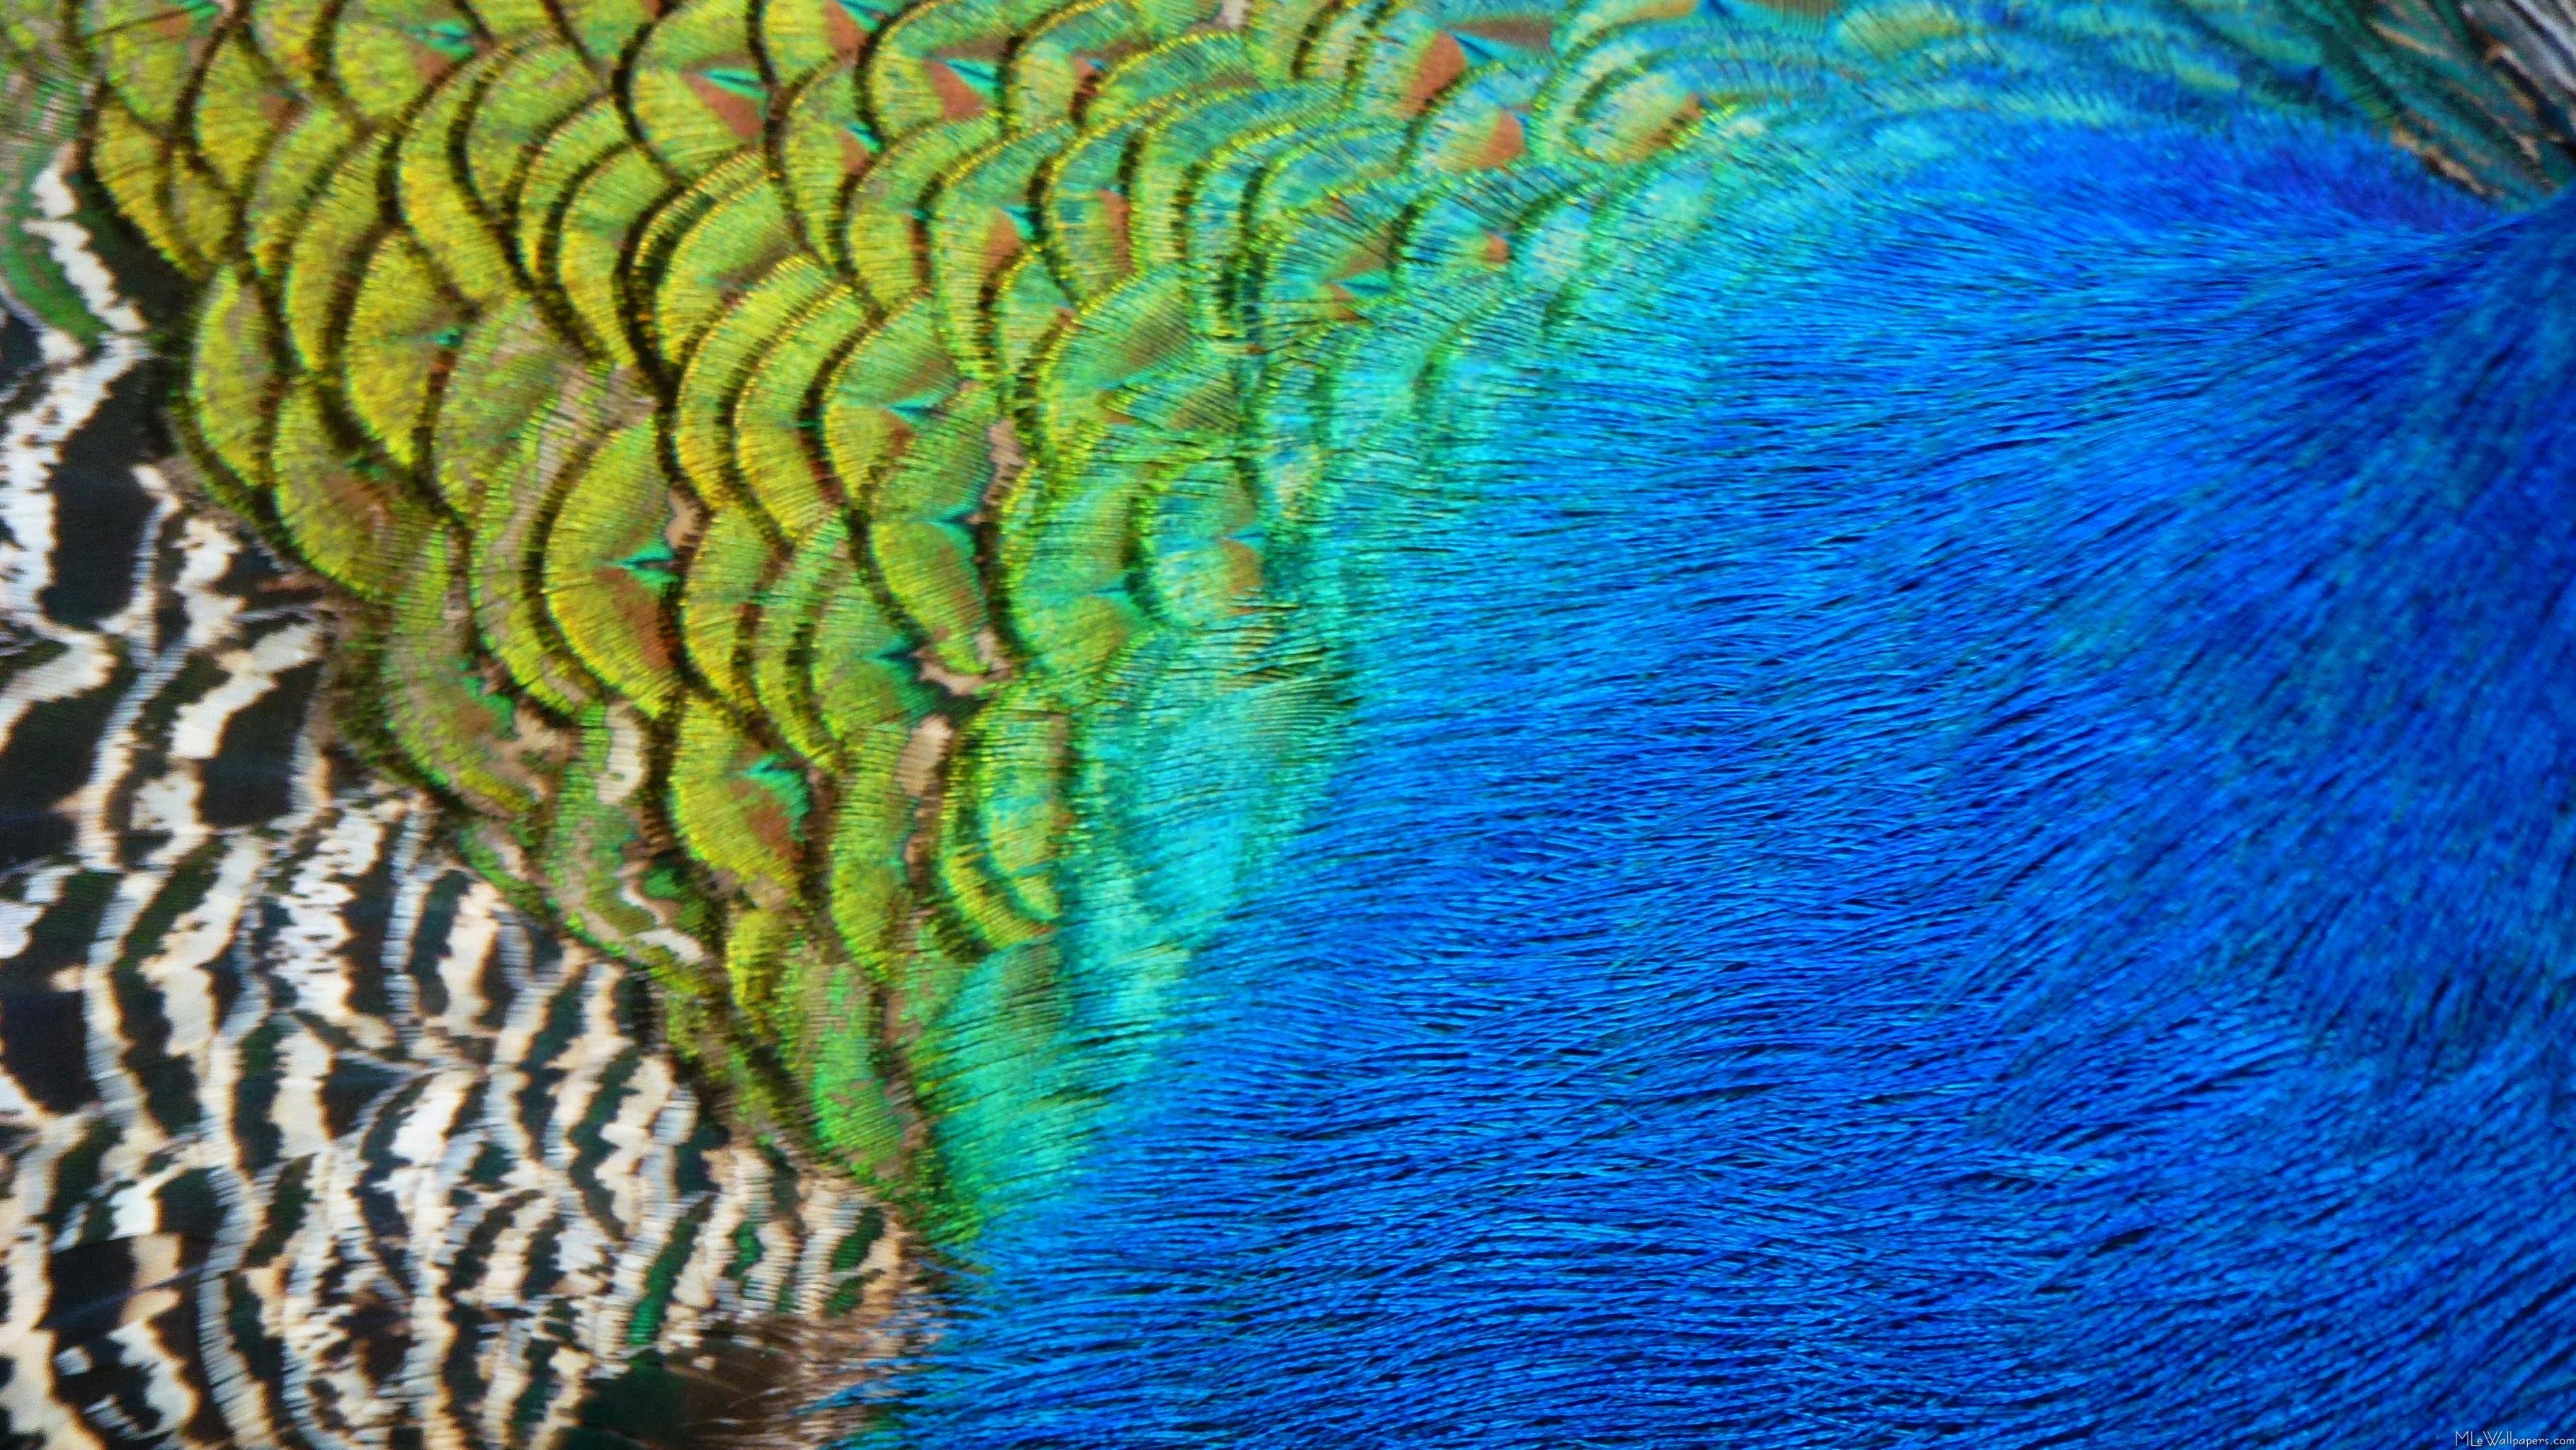 3638x2048 I love the iridescent shades of blue and green in peacock feathers. Here's  an abstract view of the side of a peacock and his feathers. Peacock Feathers  IV